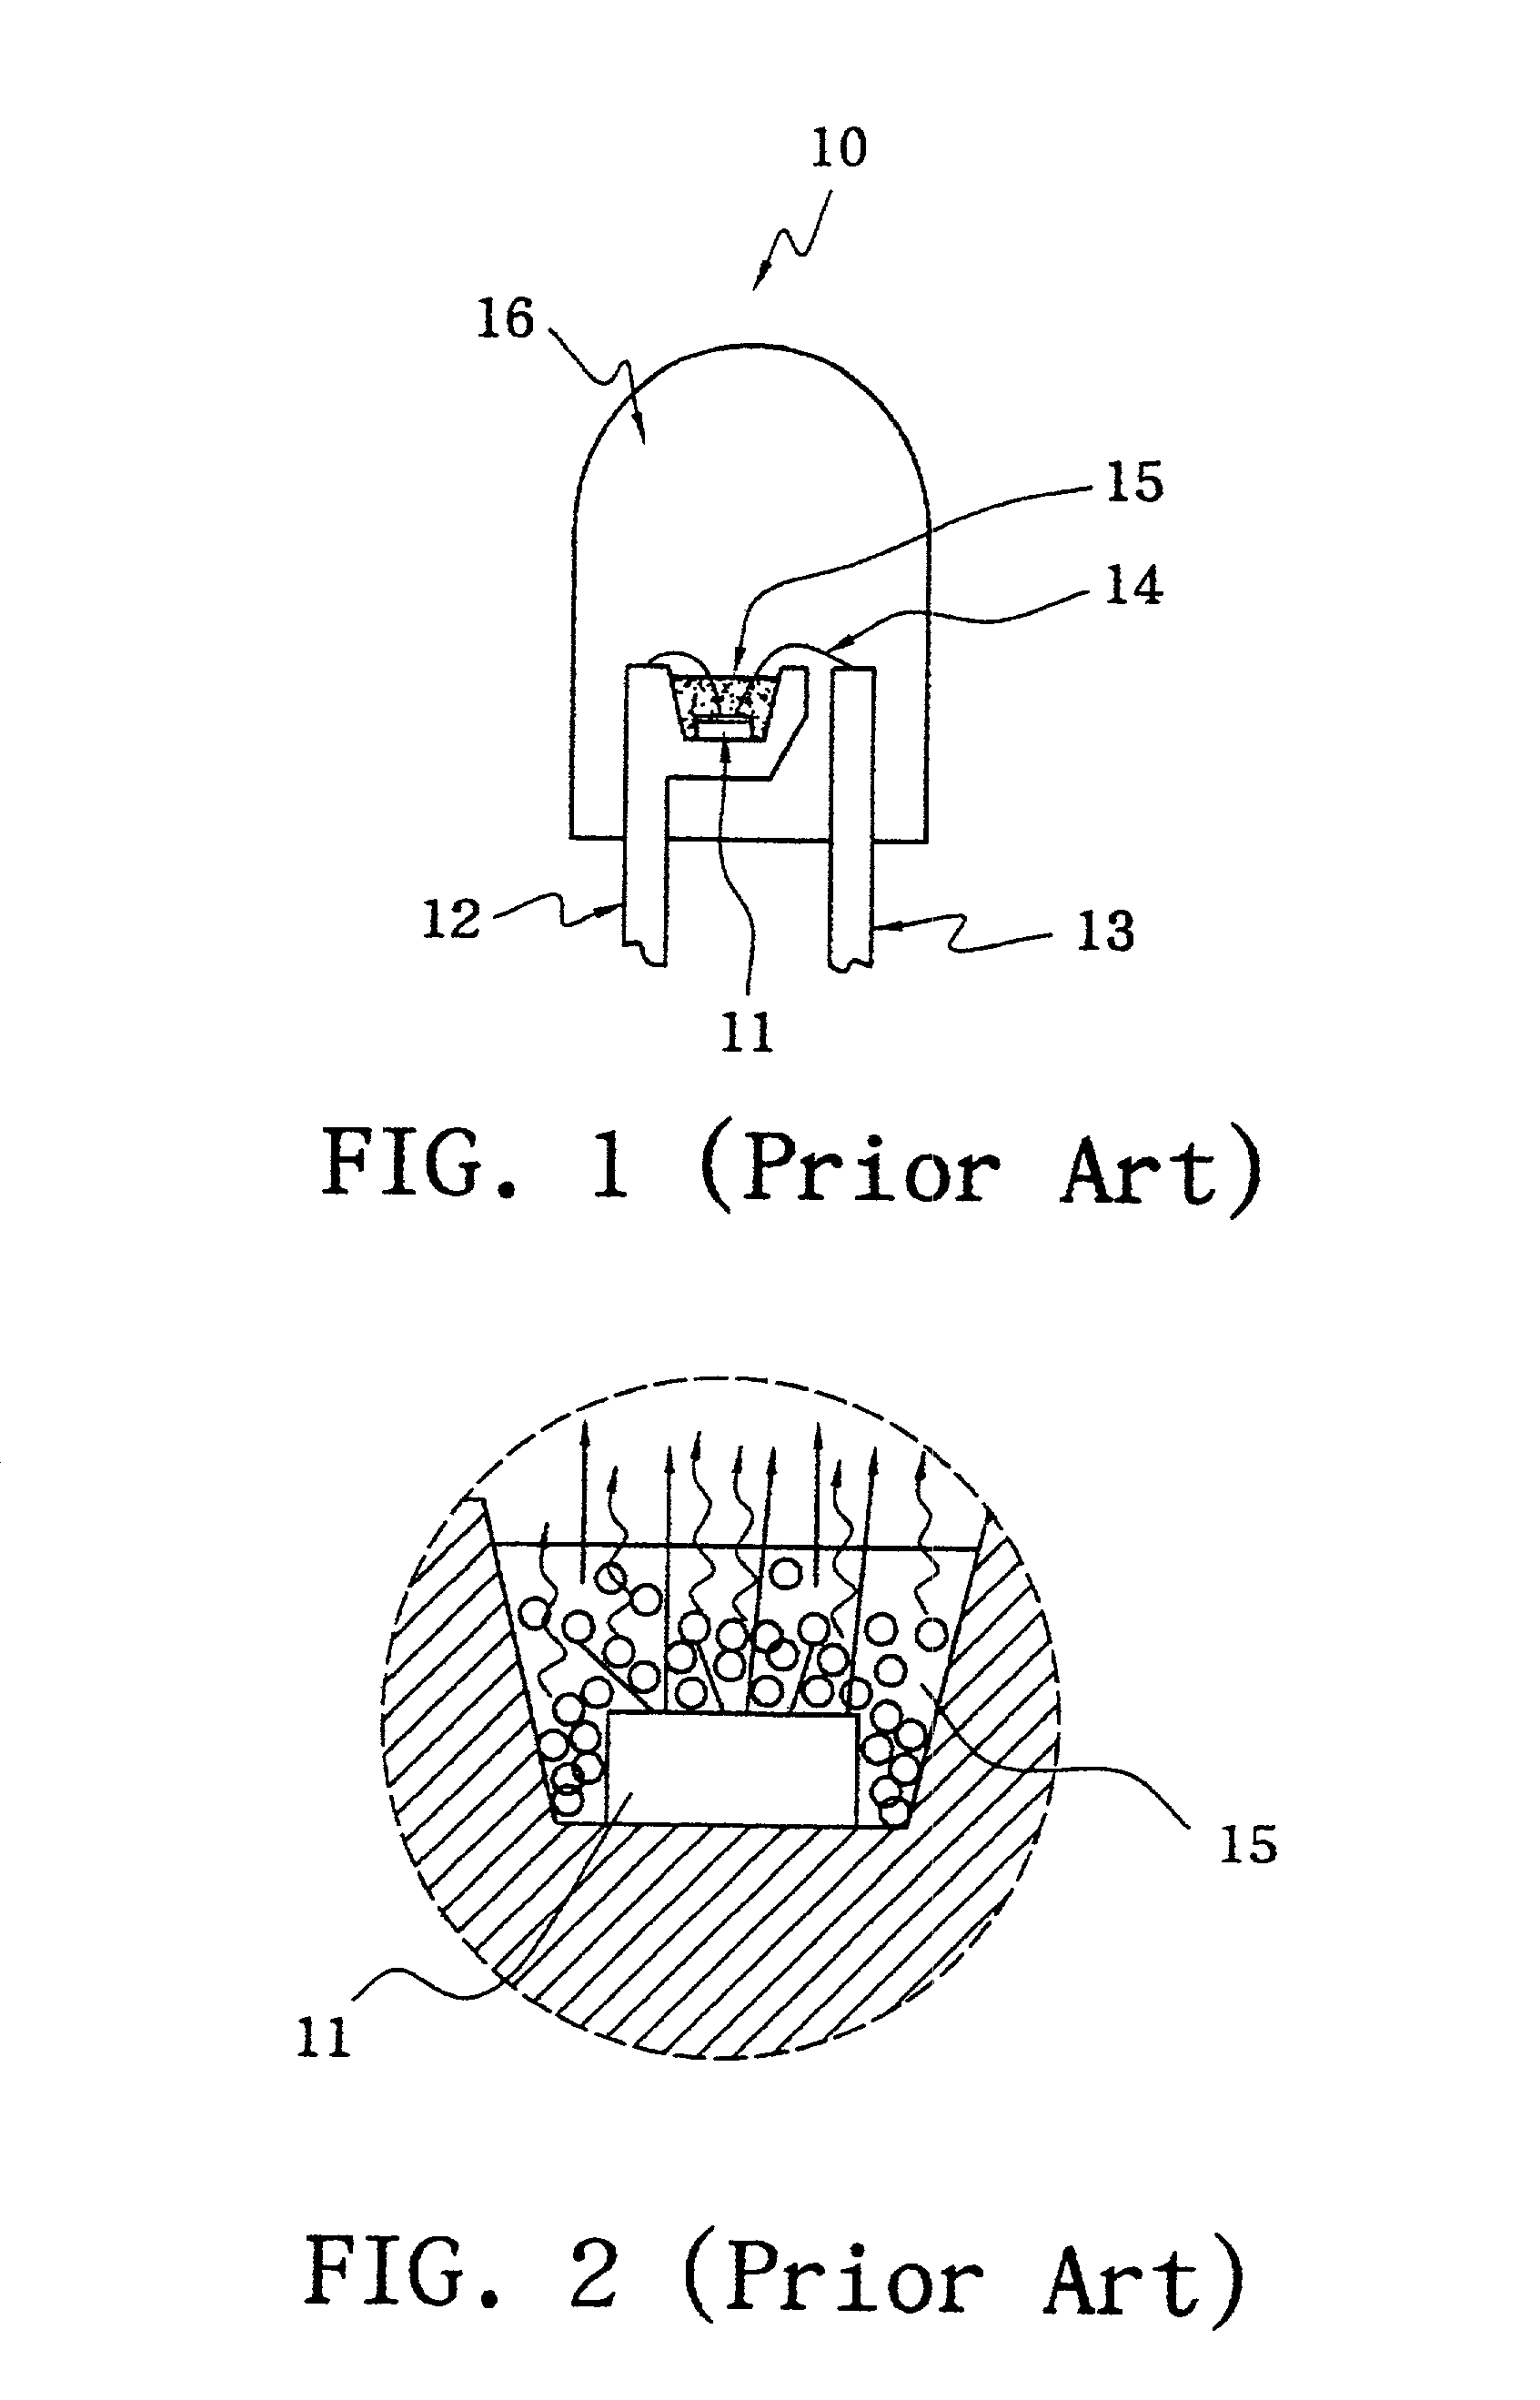 Light-mixing layer and method